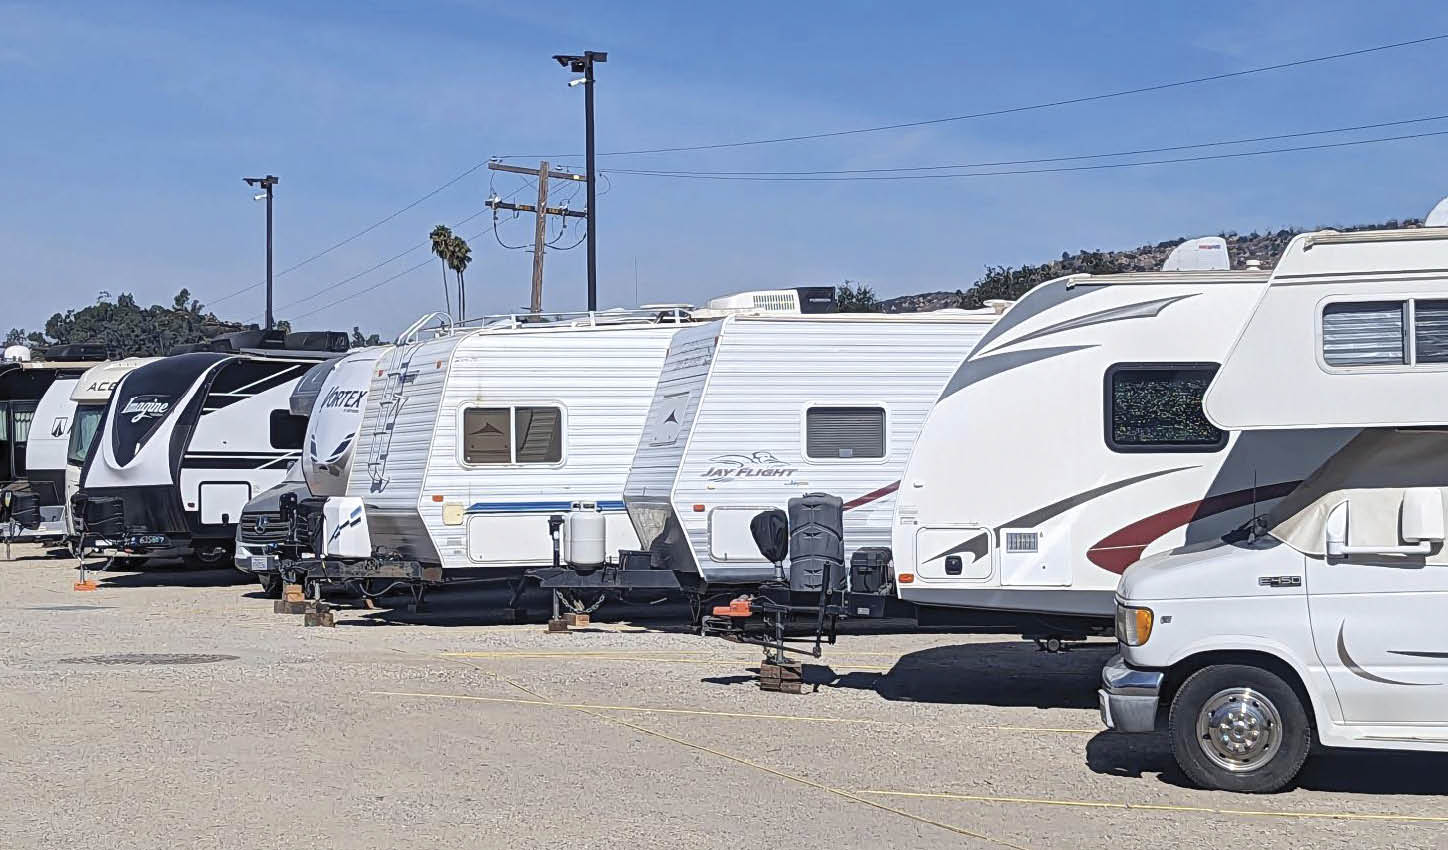 view of RVs parked in facility